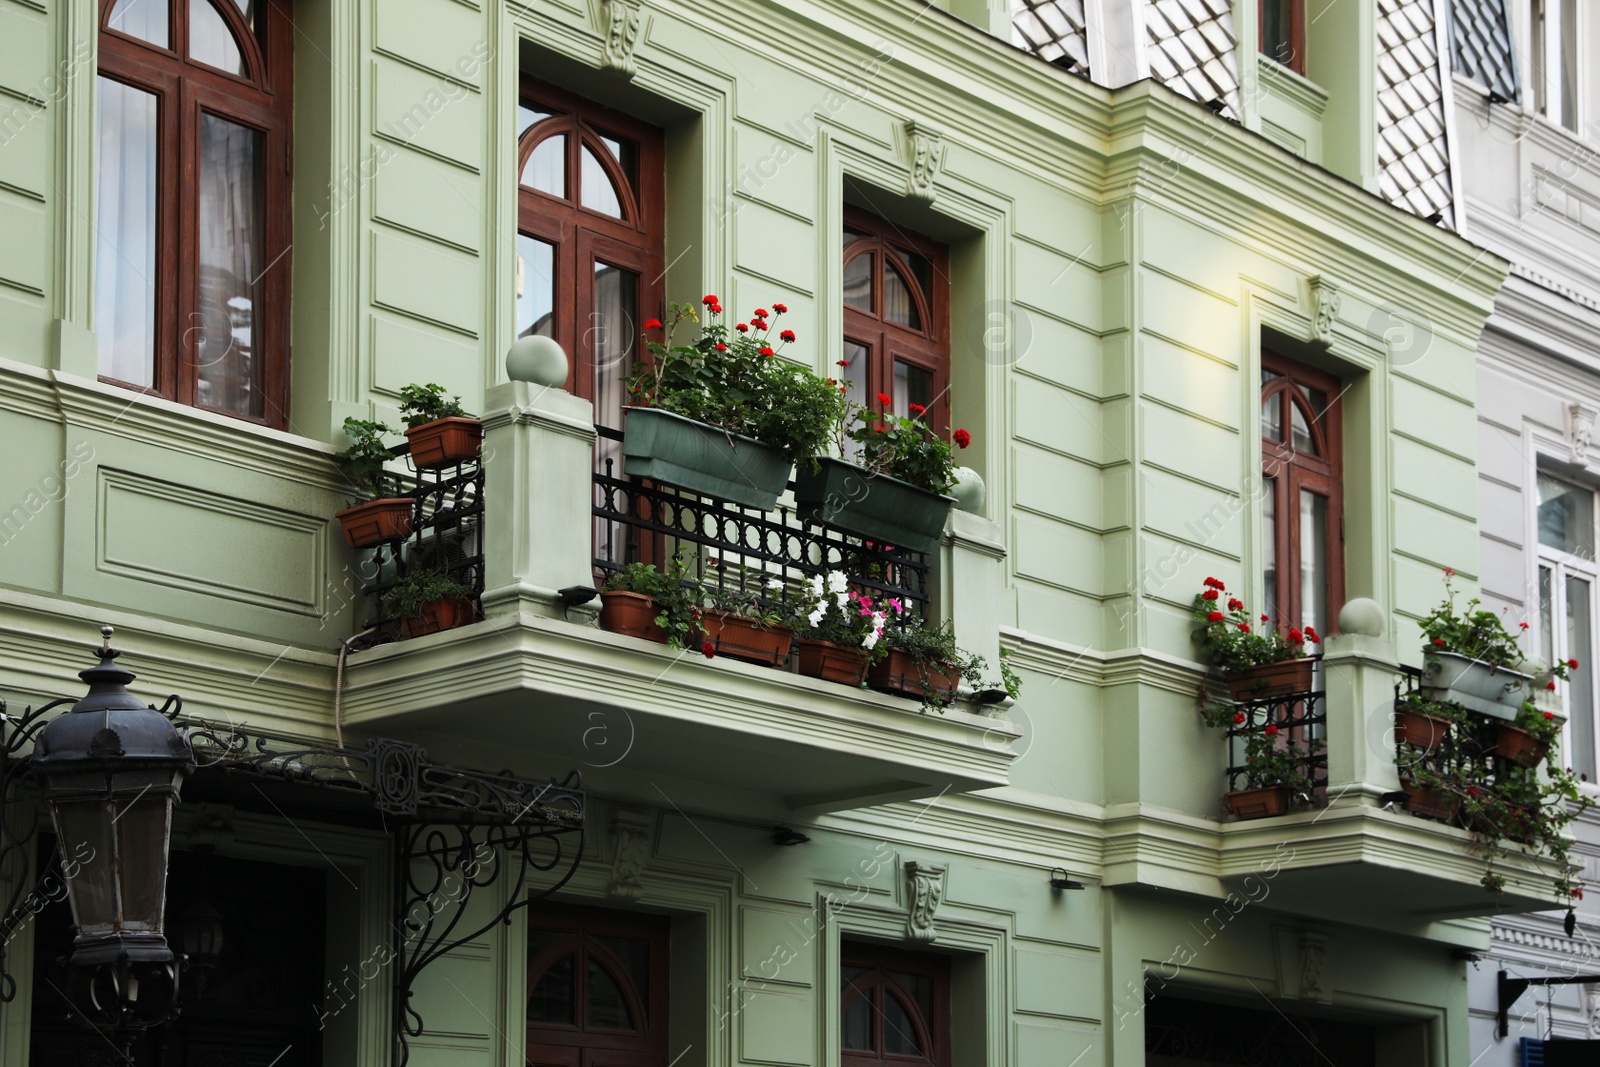 Photo of Exterior of beautiful residential building with flowers on balconies